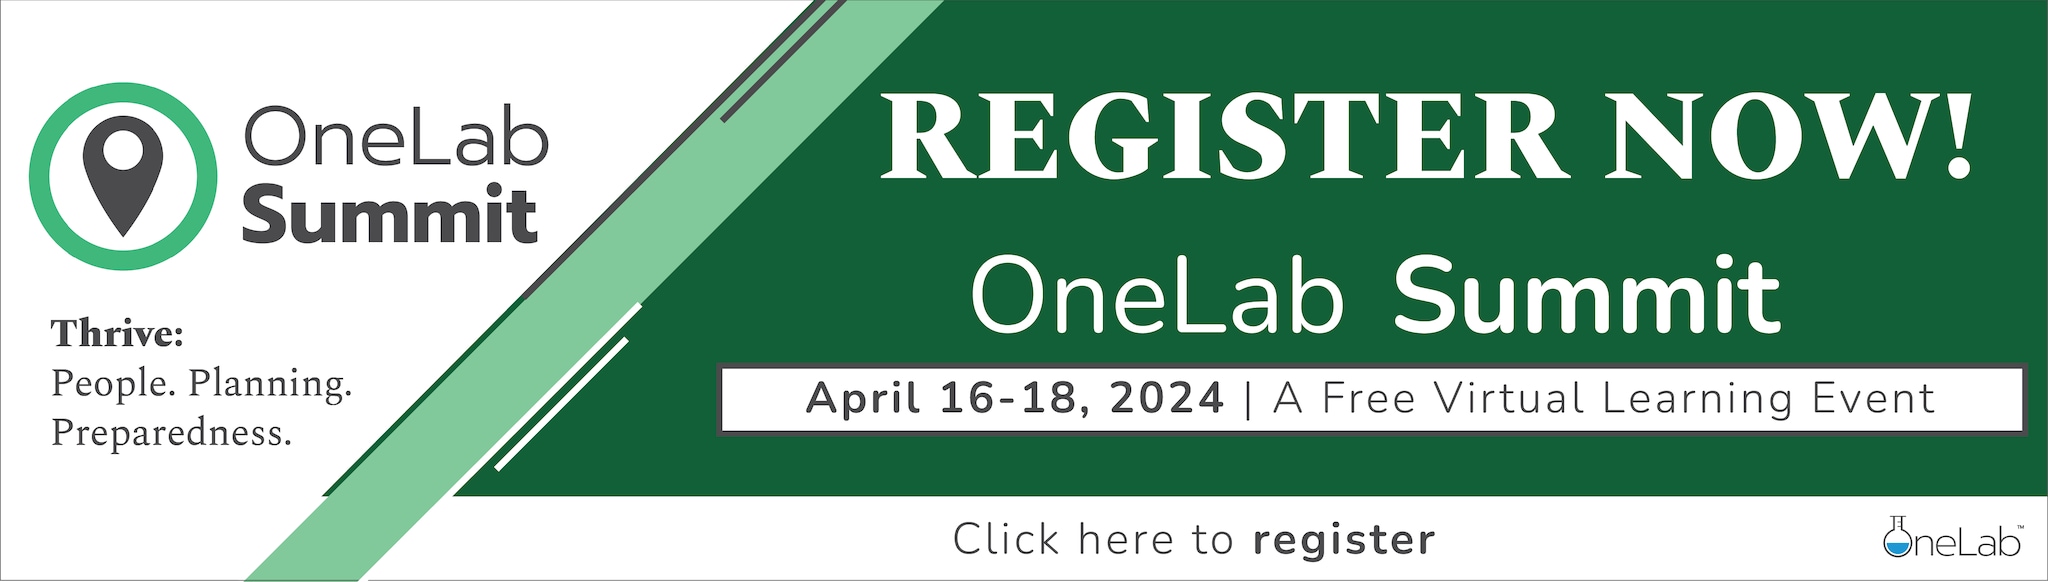 A graphic banner encouraging registration for the 2024 OneLab Summit